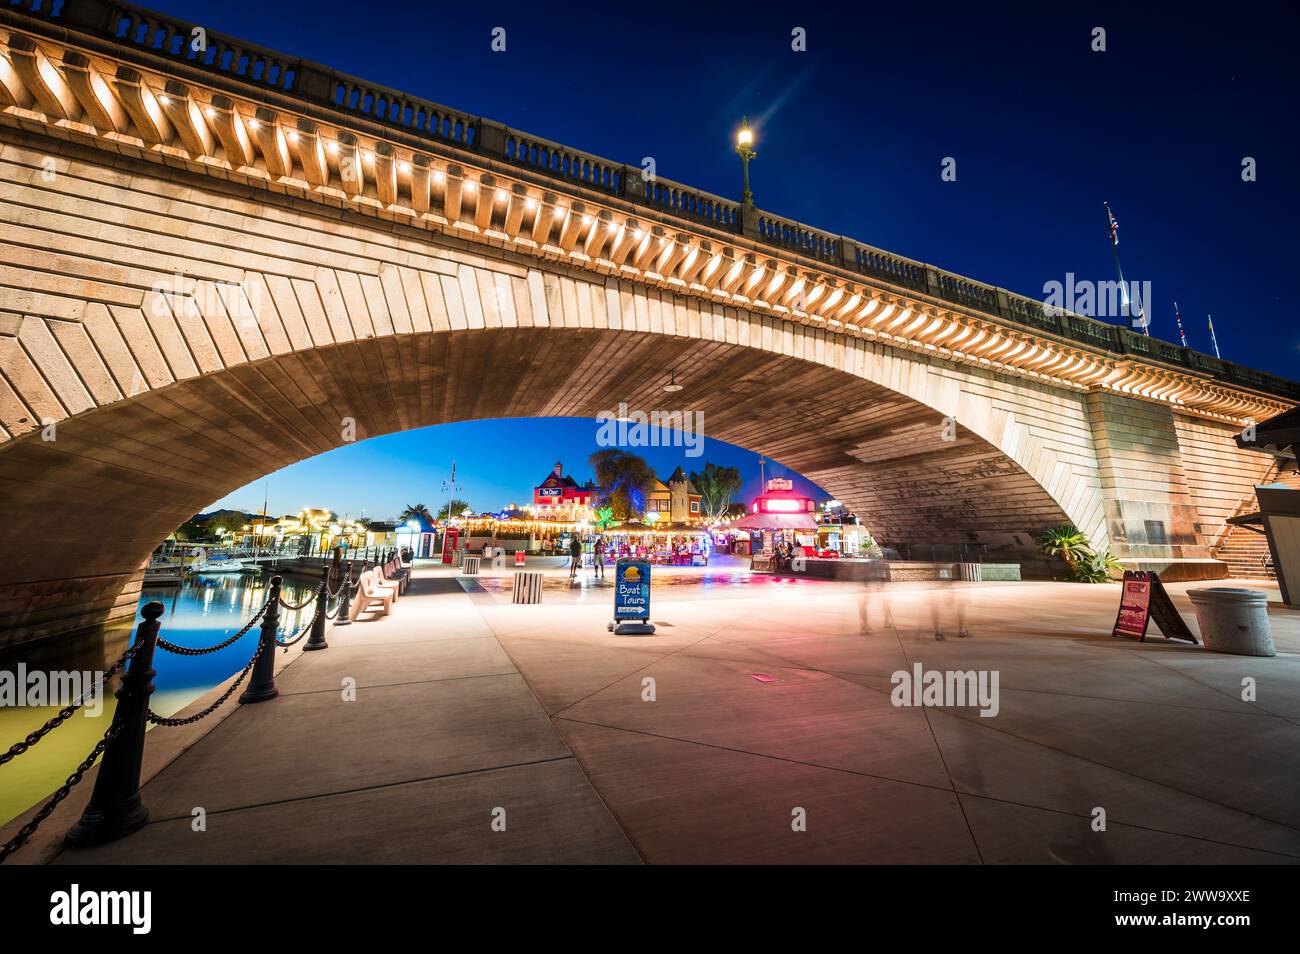 Tourists near the old London Bridge at sunset, which was relocated from London England in the 1970’s to Lake Havasu Arizona. Stock Photo